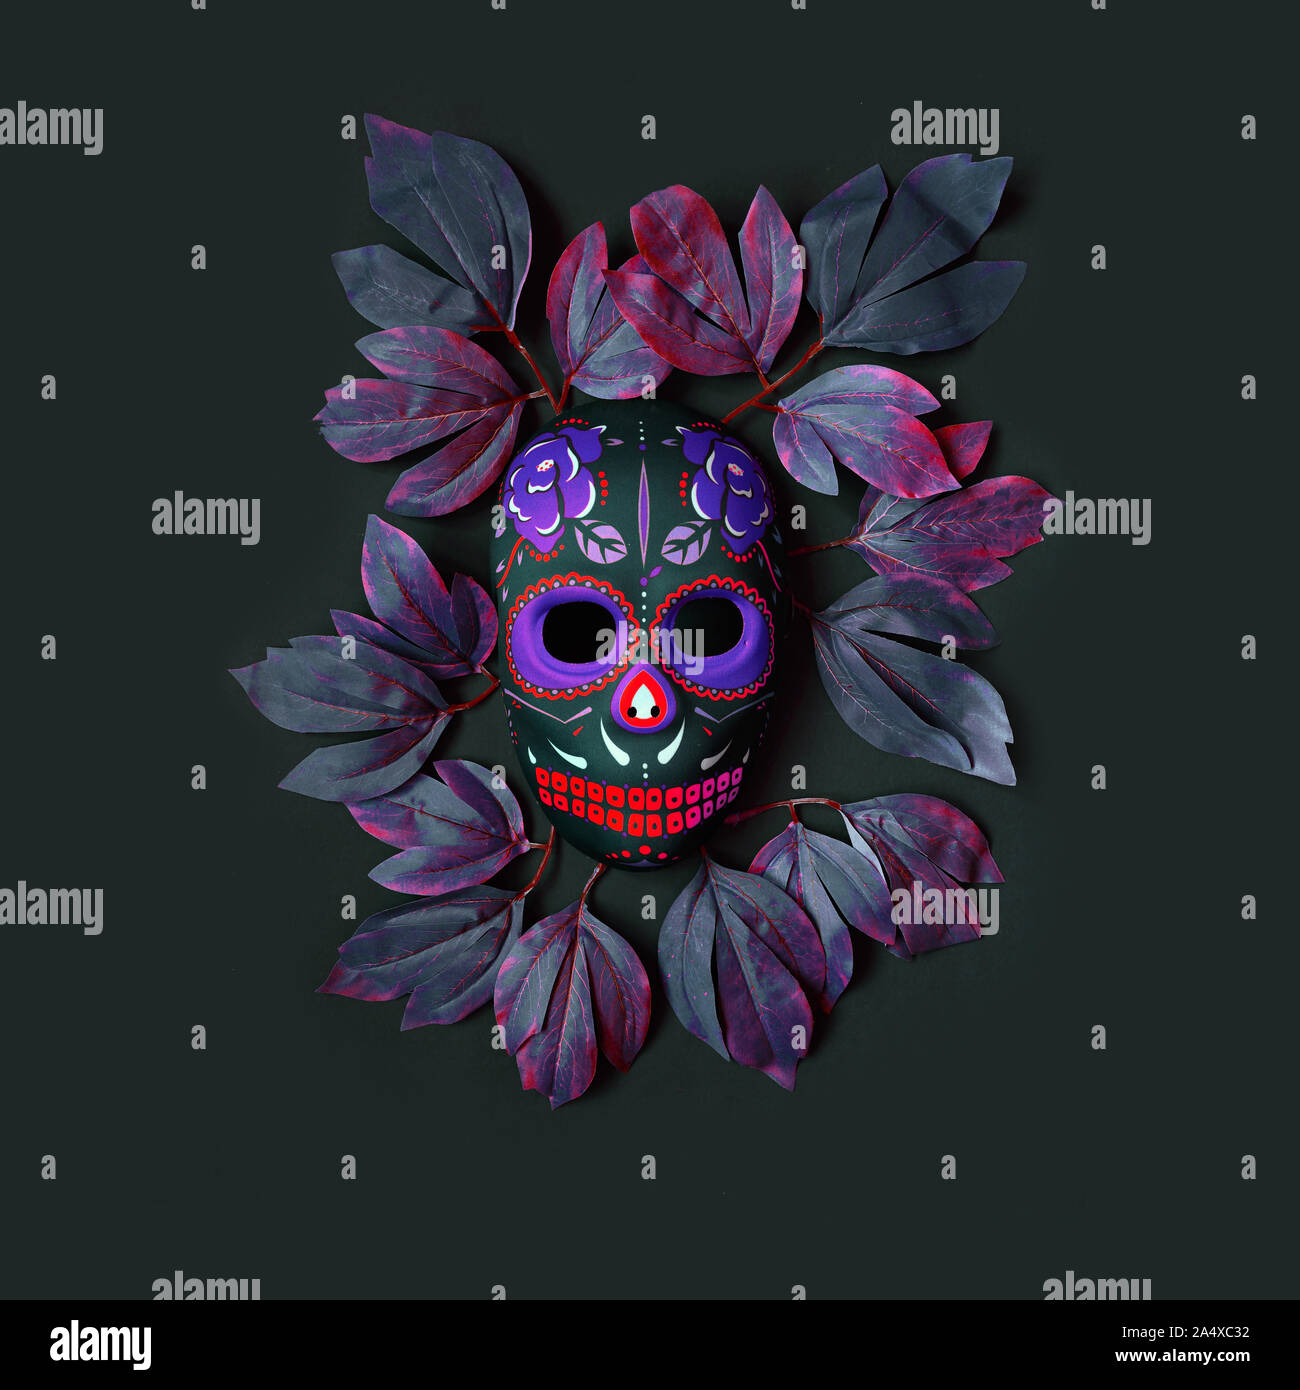 Sugar skull mask with flowers used for celebrating Day of the Dead in hispanic culture. Mexican symbol of the traditional Dia de los Muertos. Hallowee Stock Photo